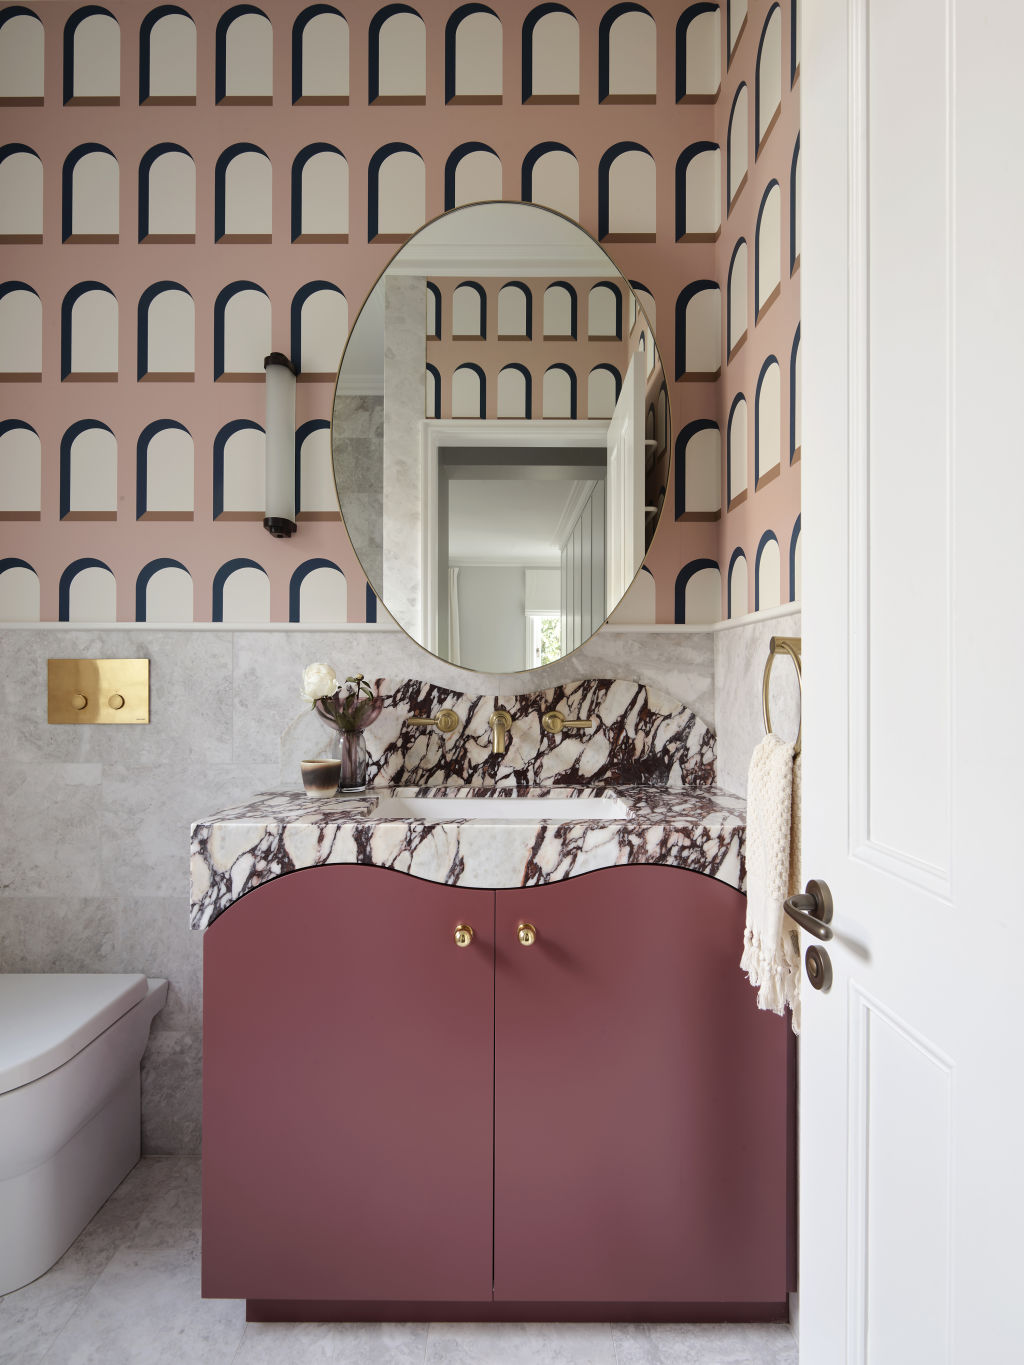 'Colours really bring a space to life,' Sarah-Jane Pyke says. Arent &amp; Pyke Darley Road bathroom Photo: Anson Smart. Stylist: Claire Delmar.